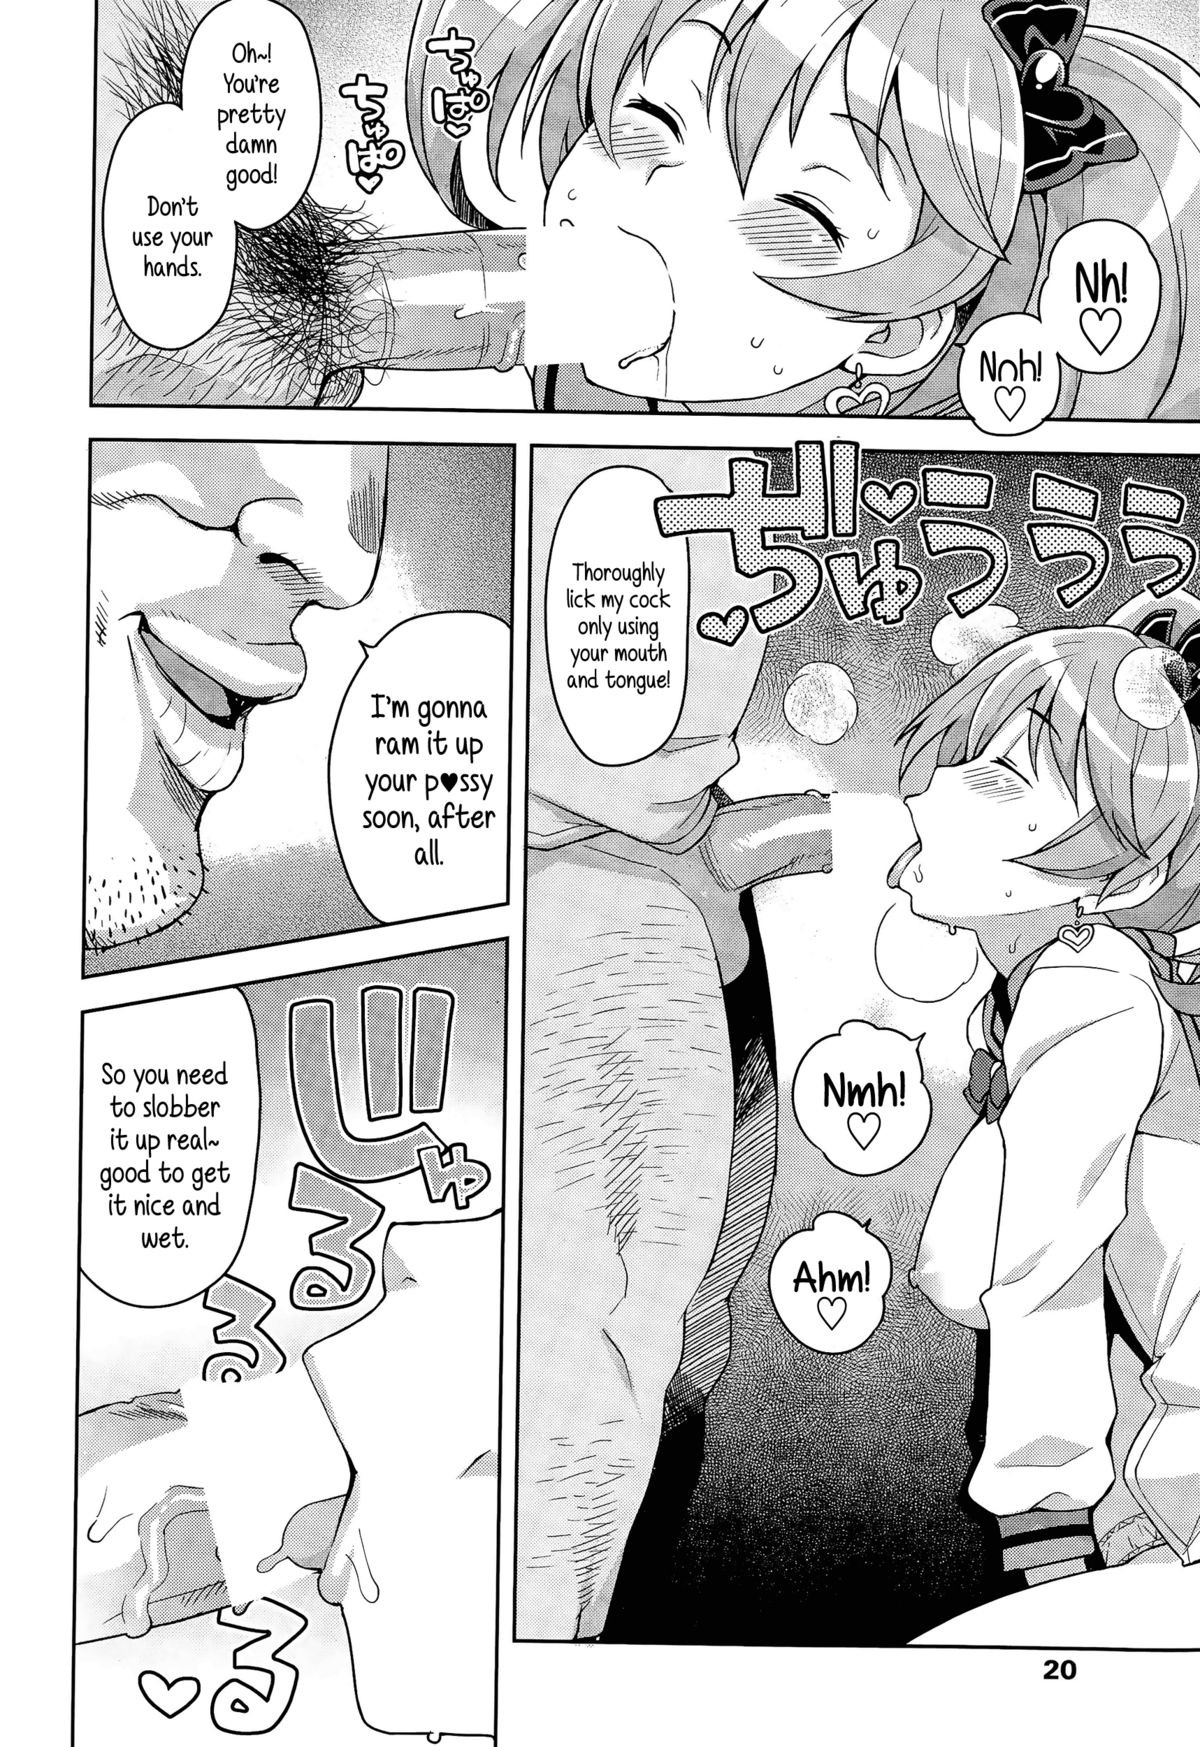 [Tamagoro] Hametomo Collection Ch. 1-2 | FuckBuddy Collection Ch. 1-2 [English] {5 a.m.} page 26 full